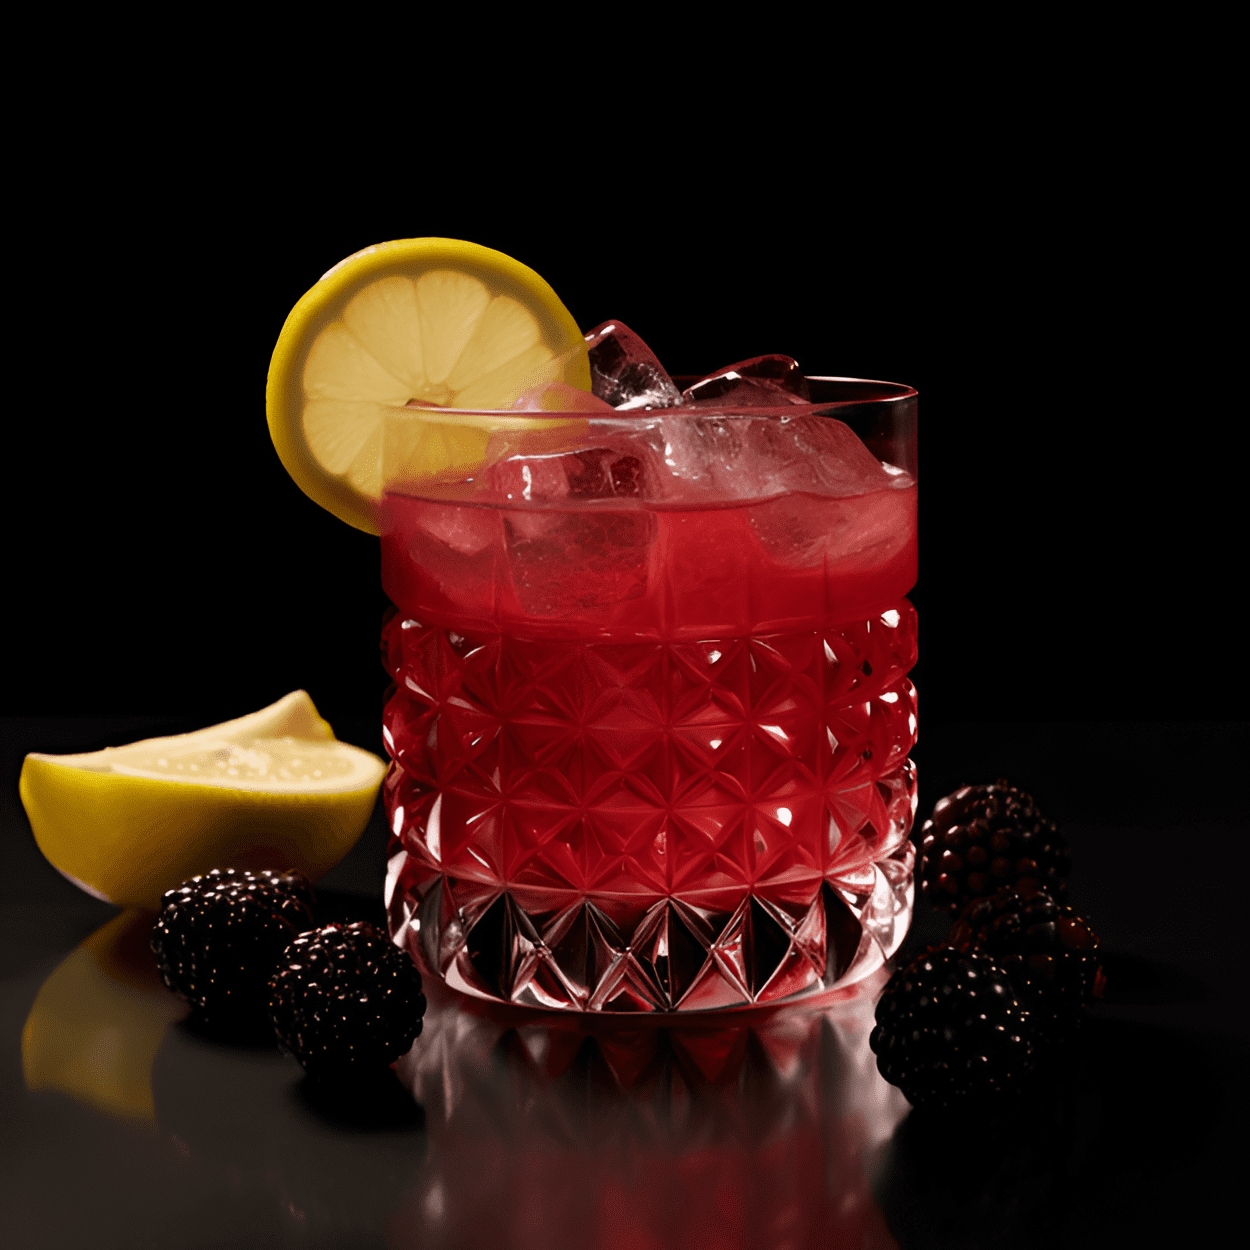 Bombay Bramble Cocktail Recipe - The Bombay Bramble is a delightful blend of sweet, sour, and slightly bitter flavors. The gin provides a smooth, botanical base, while the blackberry liqueur adds a fruity sweetness. The lemon juice cuts through the sweetness, adding a refreshing sourness, while the simple syrup balances everything out.